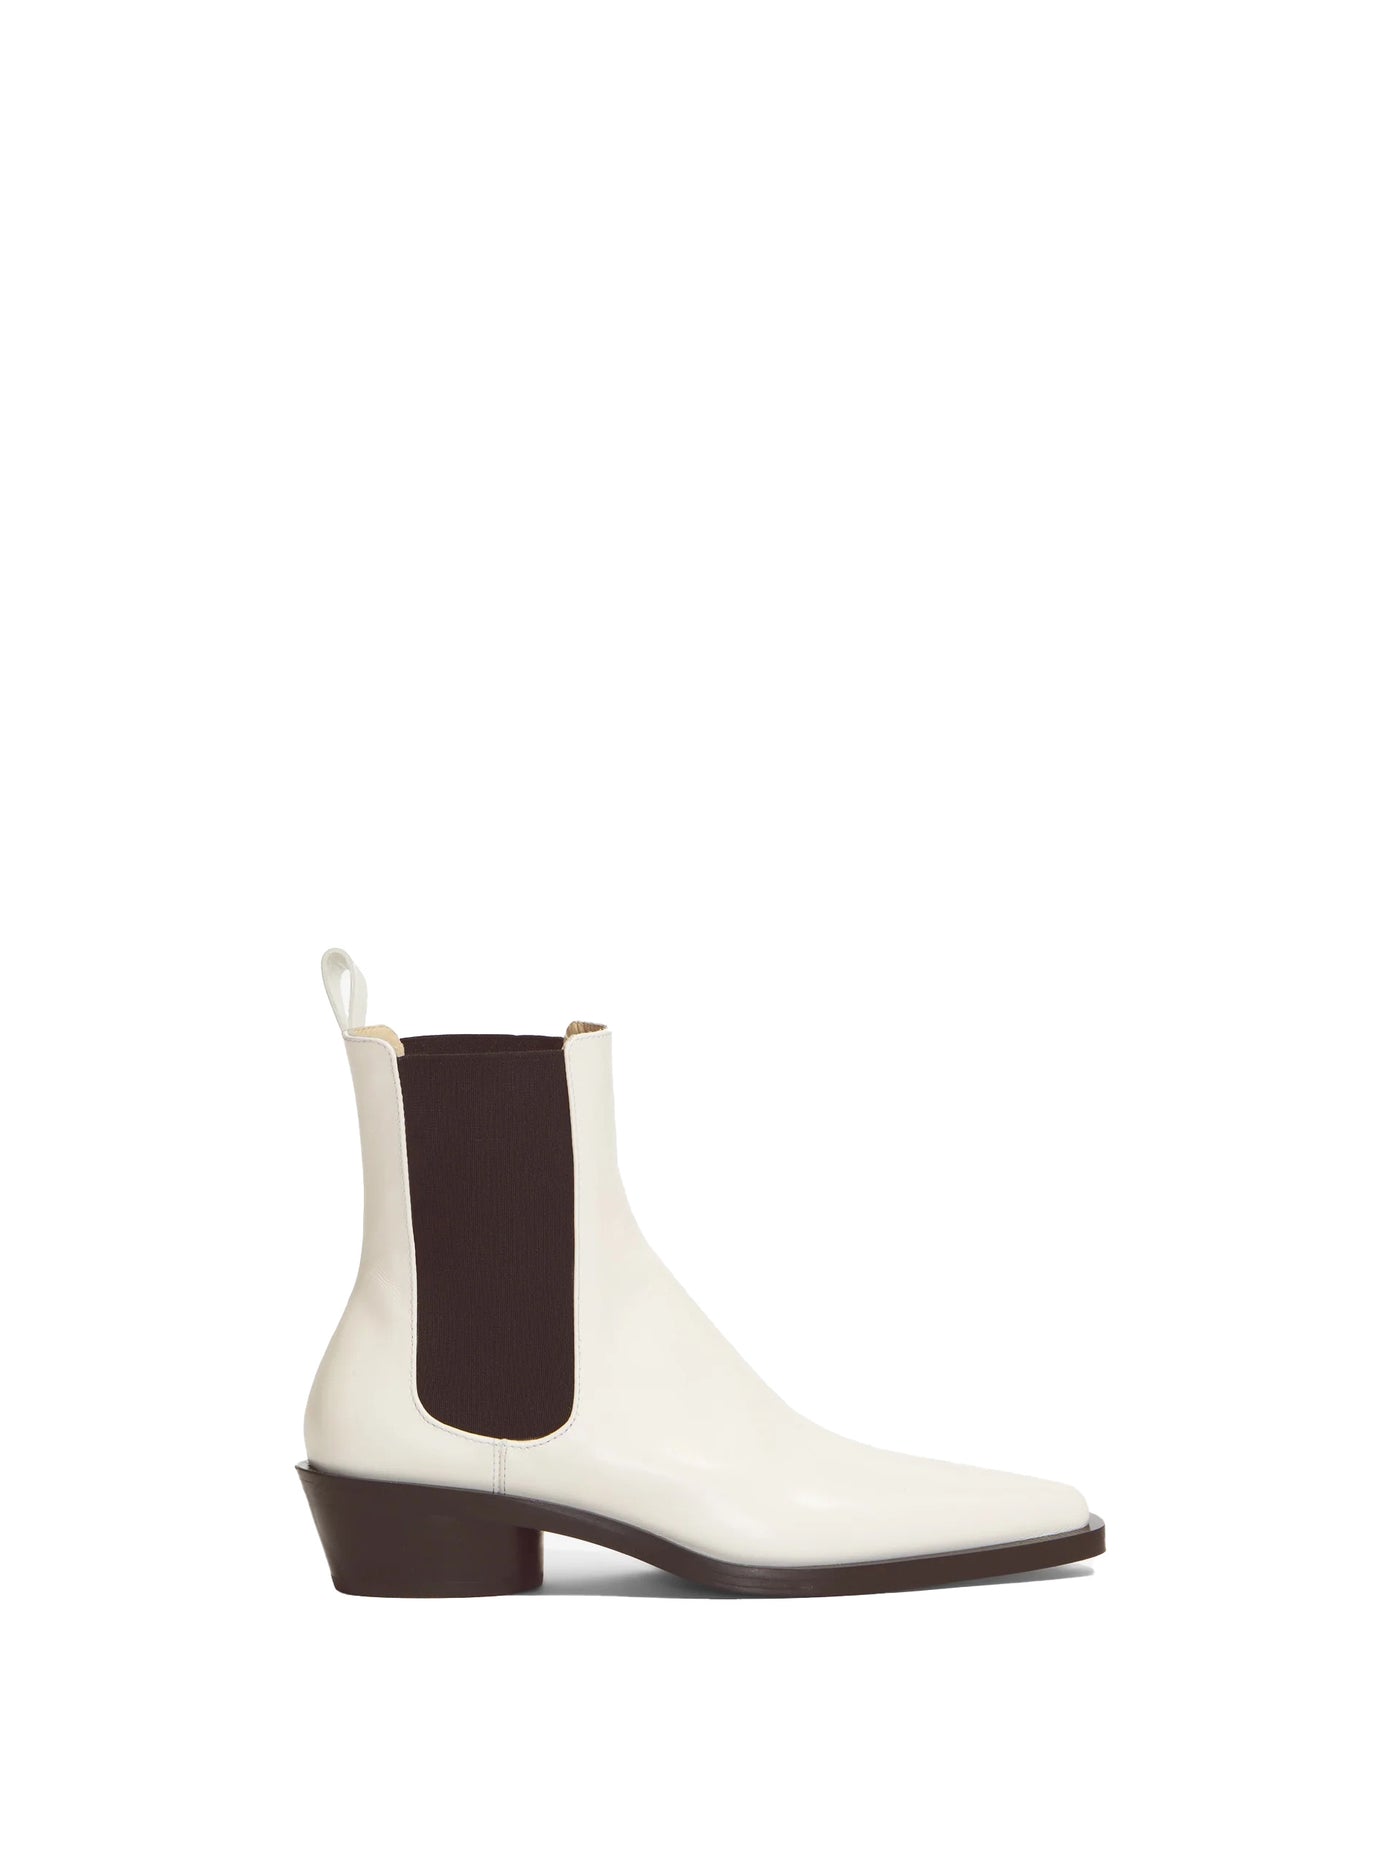 Bronco Chelsea Boots in Eggshell